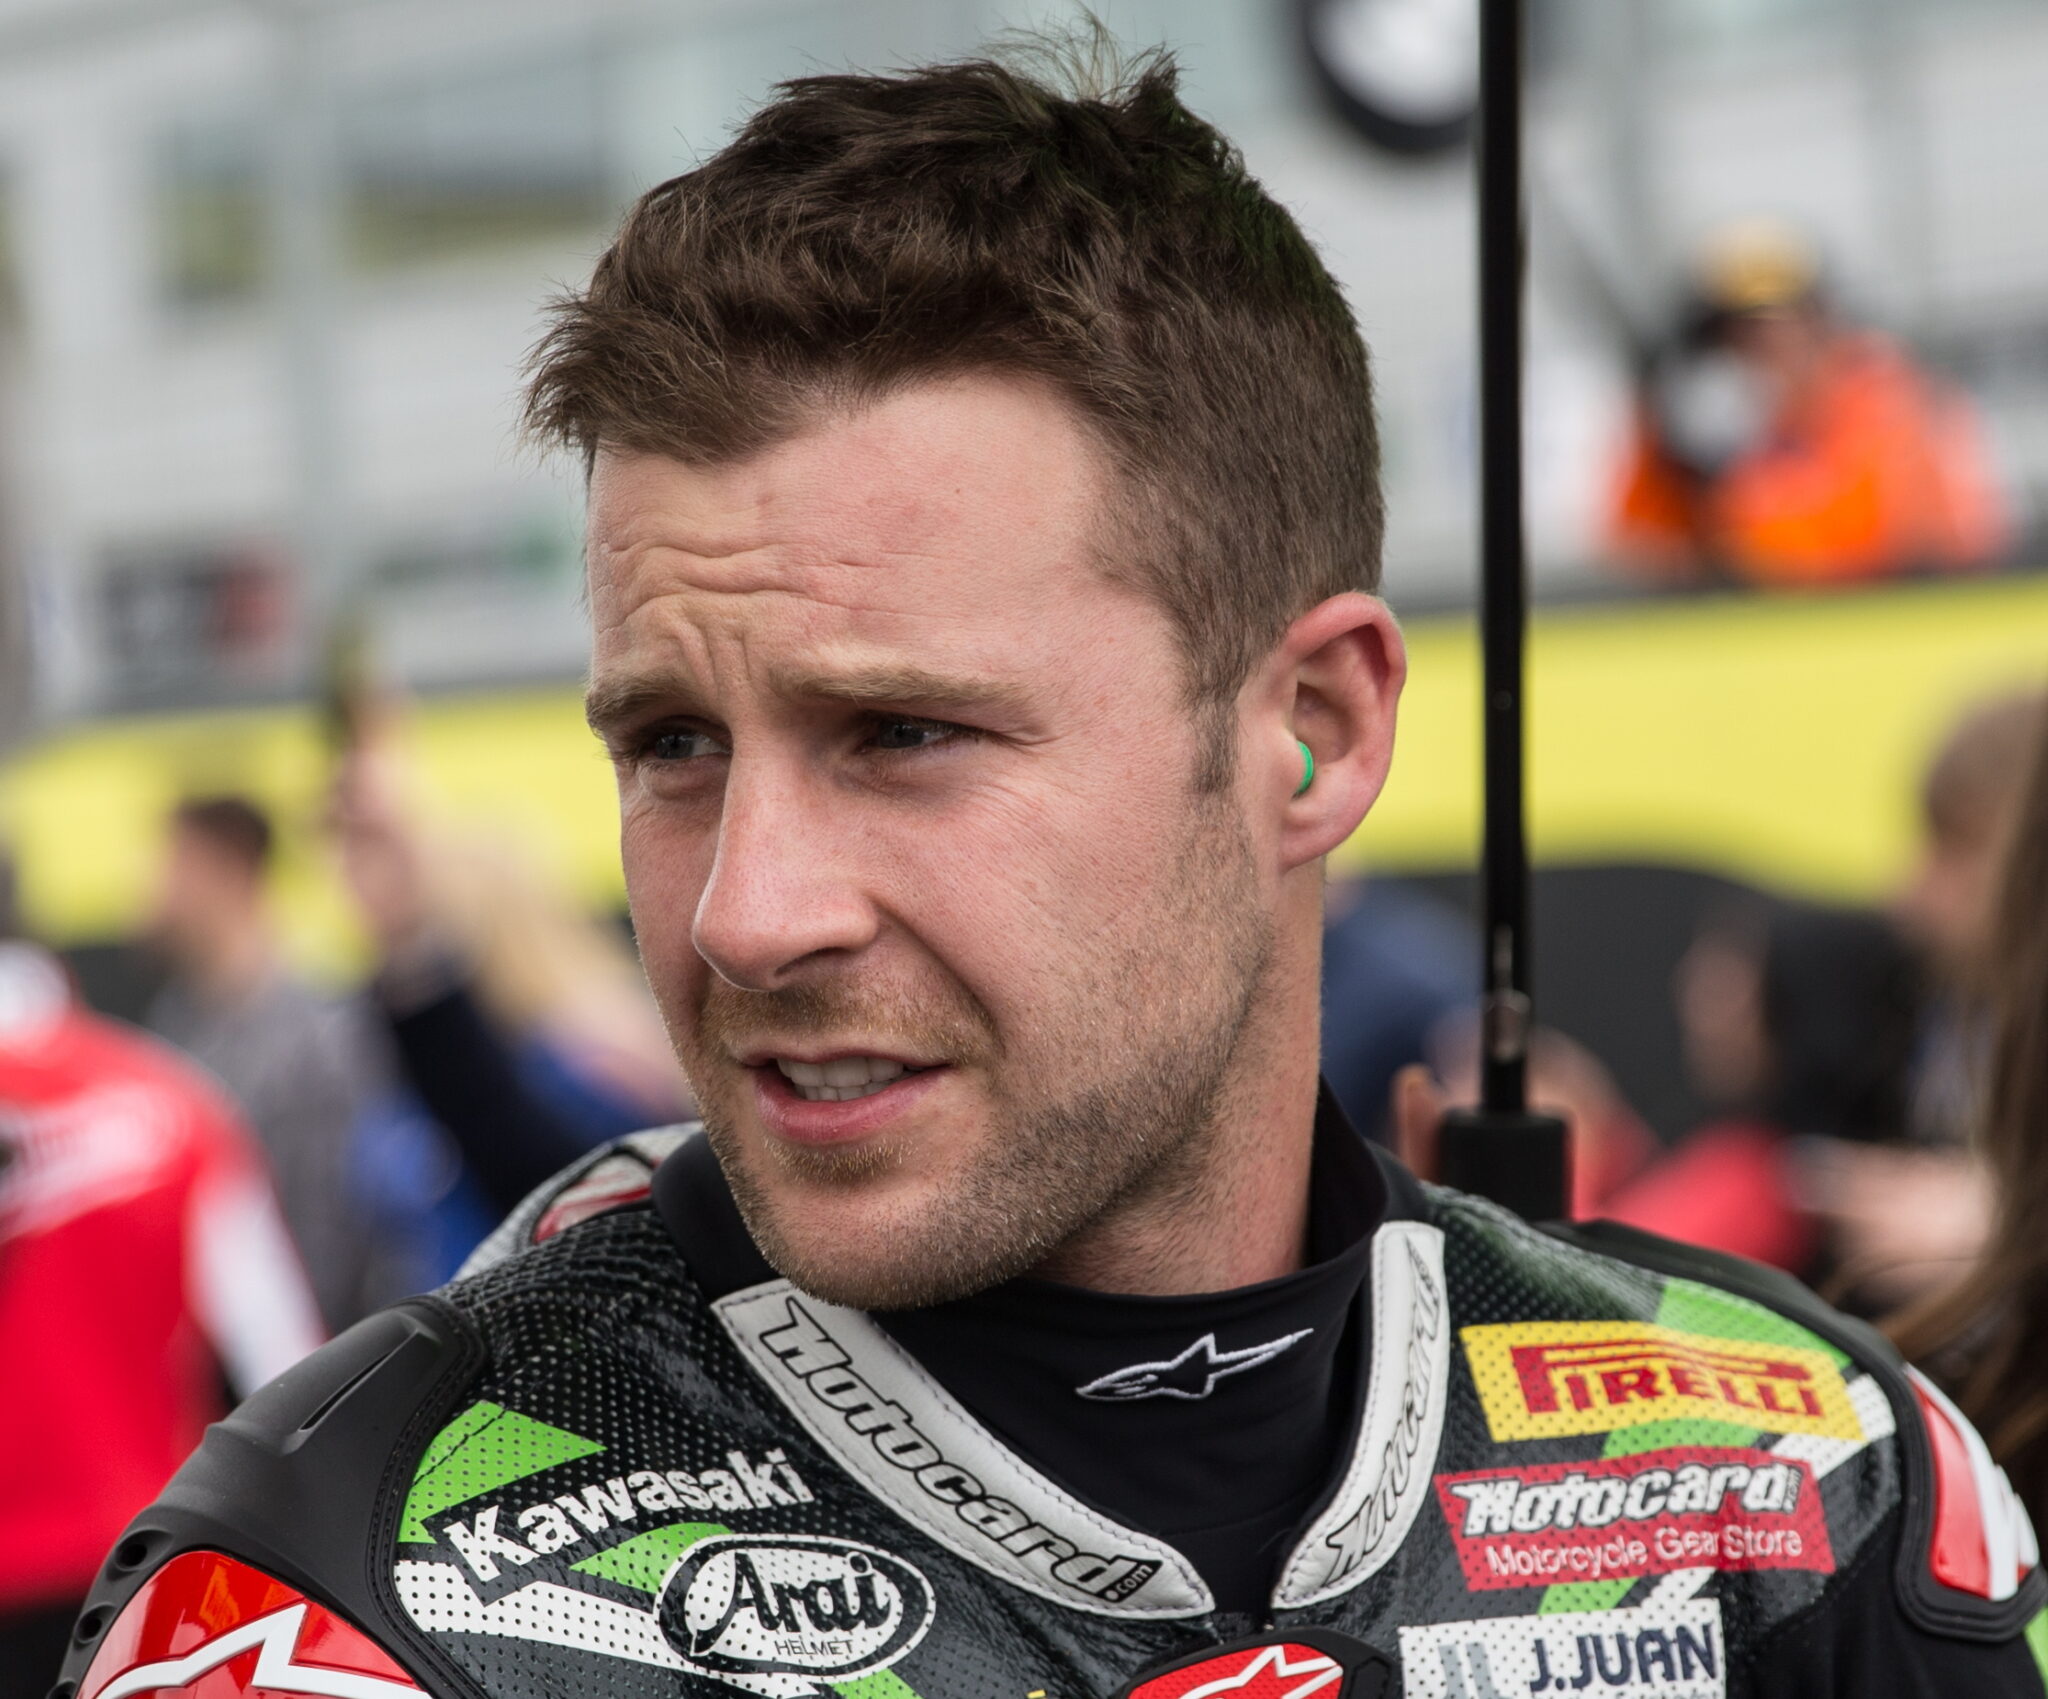 How Jonathan Rea Secured His Sixth Successive World Superbike Title 6109